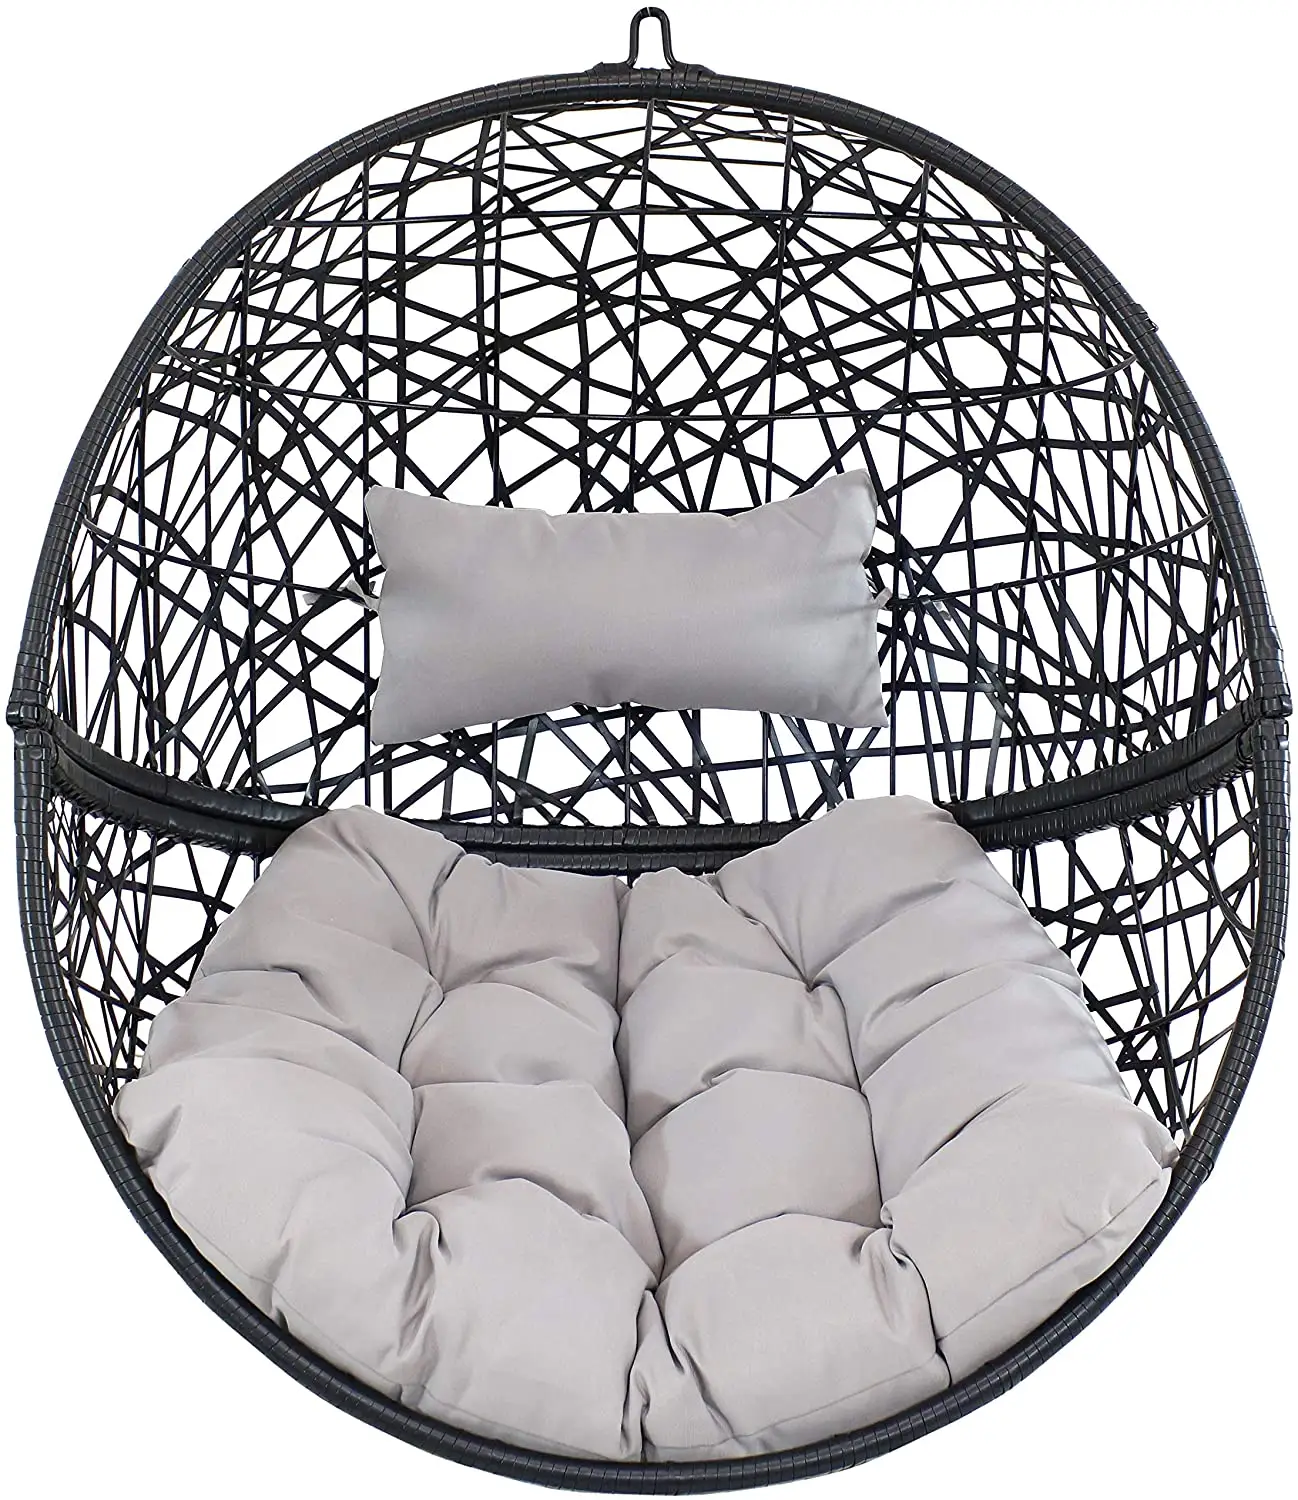 Hanging Egg Chair Swing with Steel Stand Set - All Weather Construction - Wicker Rattan Swing - Large Basket Design -